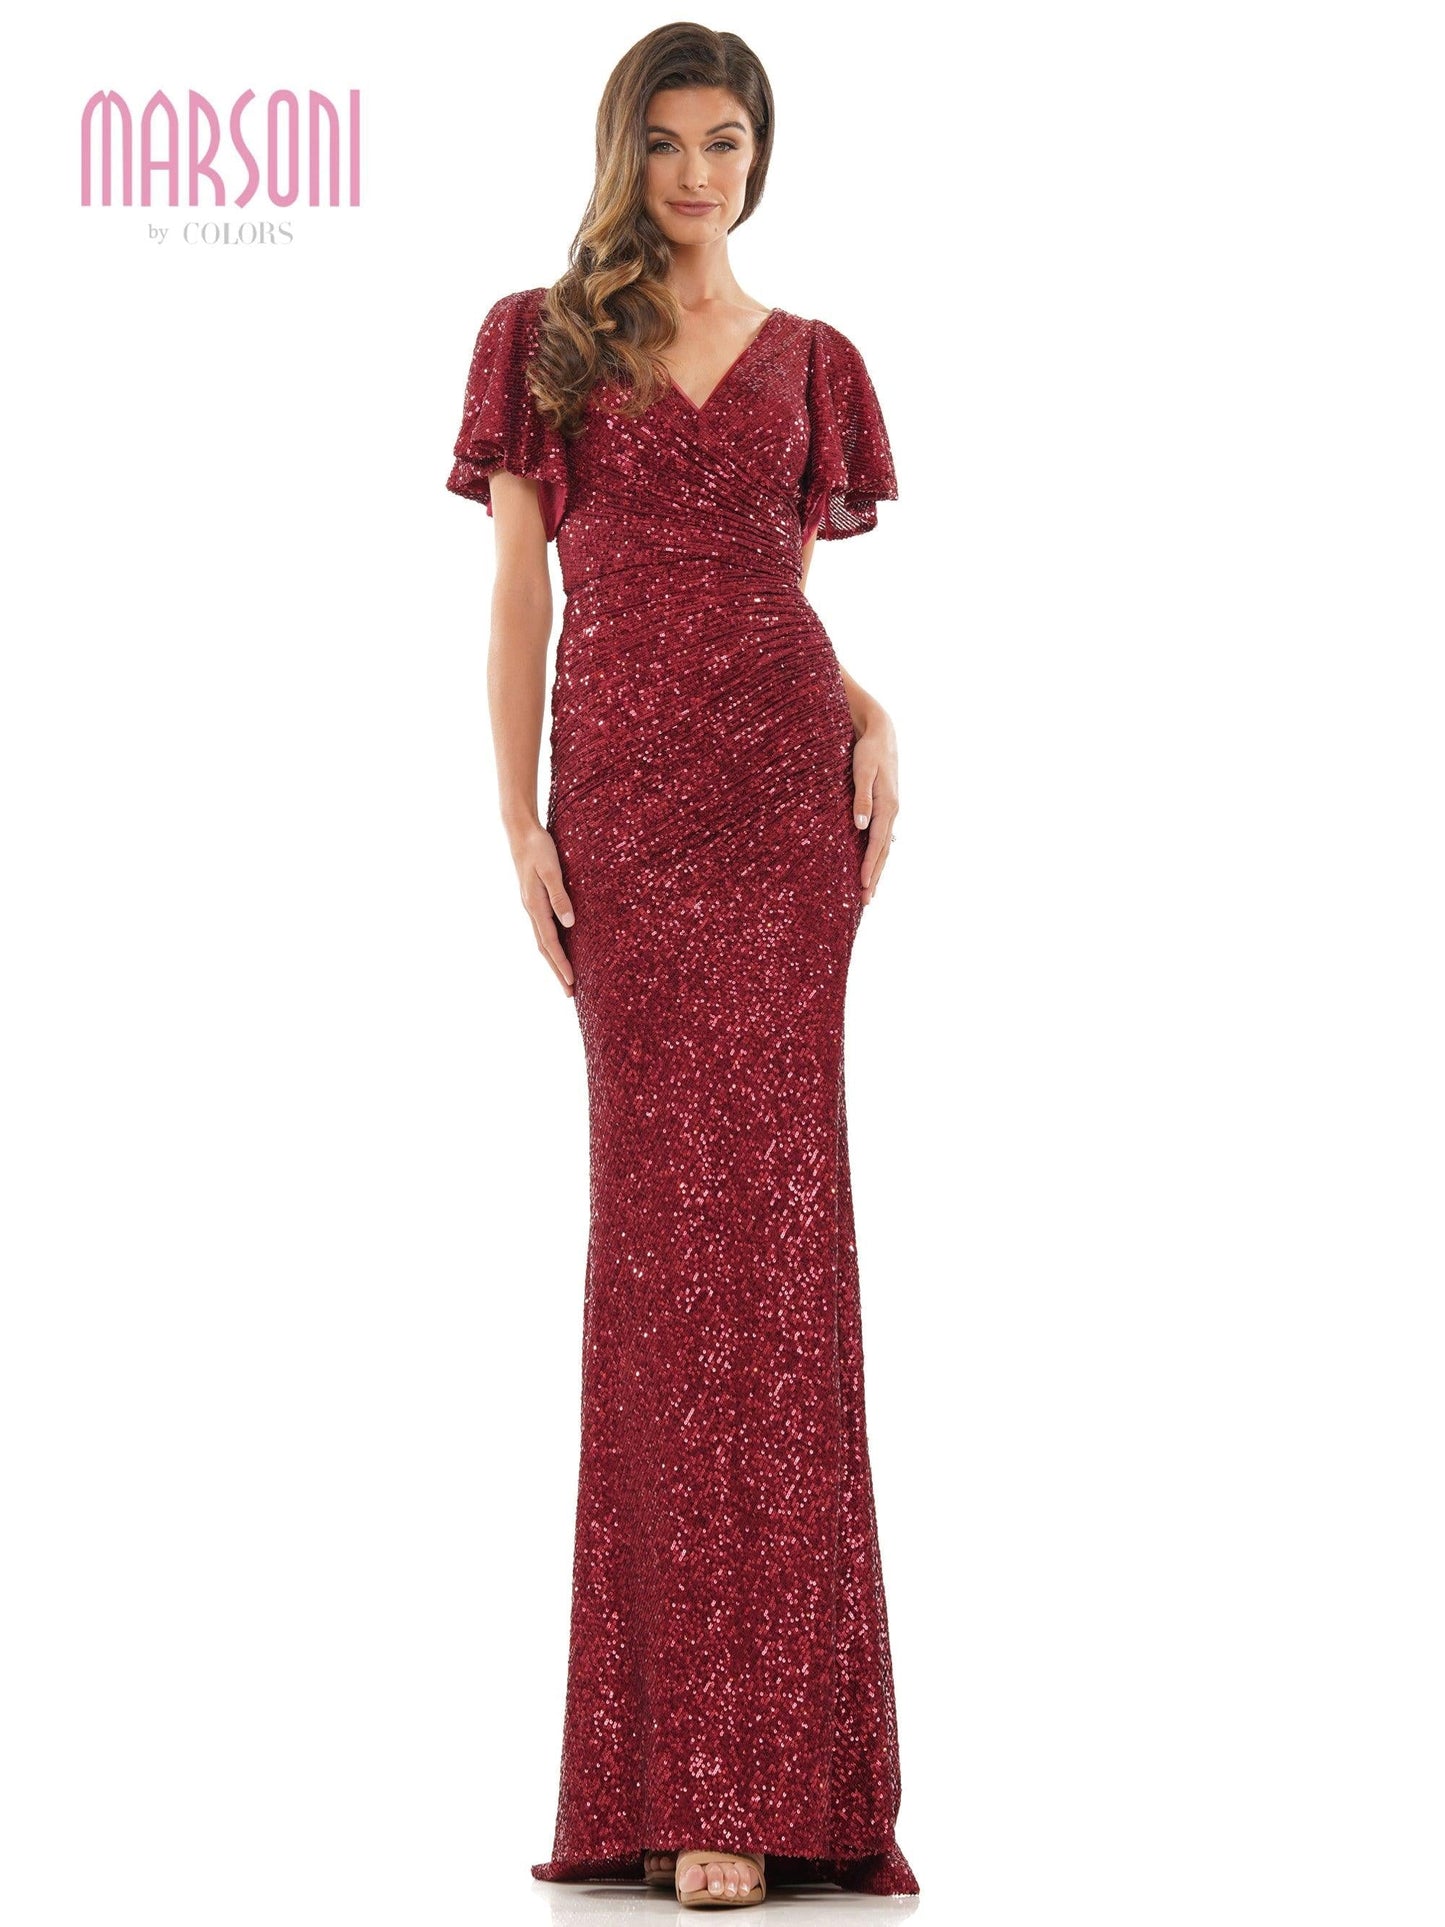 Marsoni Long Formal Mother of the Bride Dress M318 - The Dress Outlet